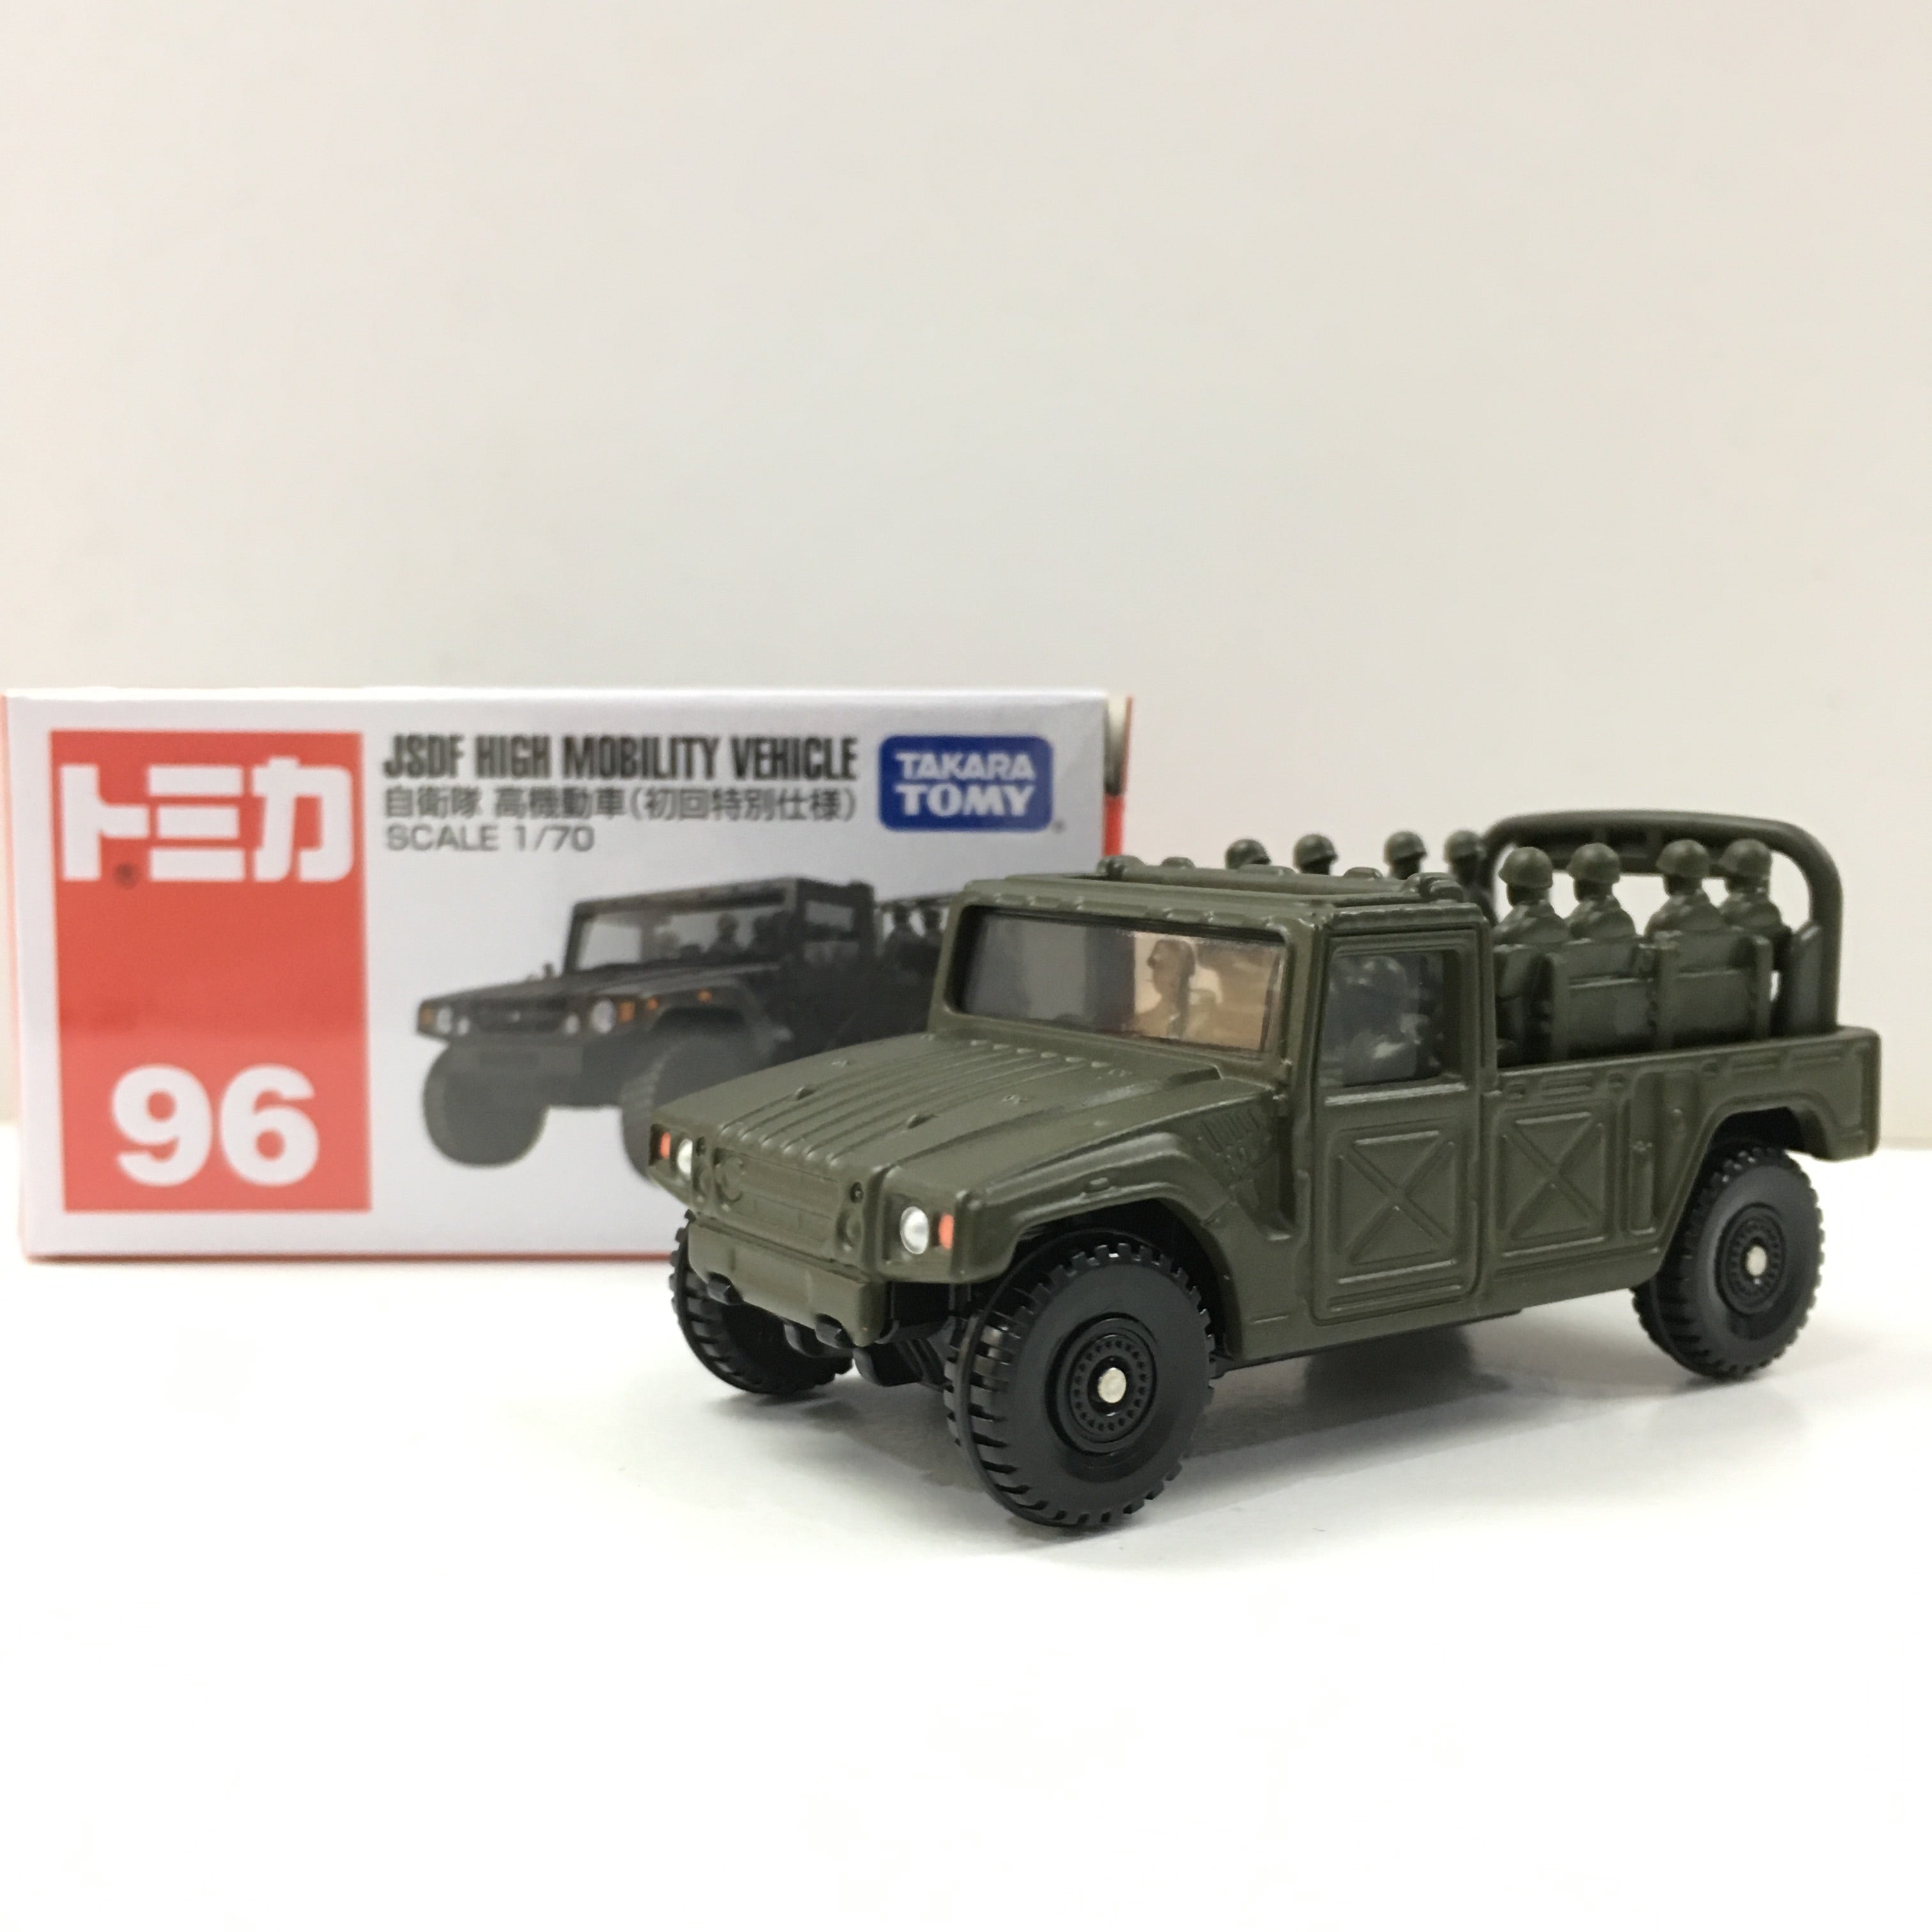 Tomica #96 JSDF High Mobility Vehicle (Initial Release)